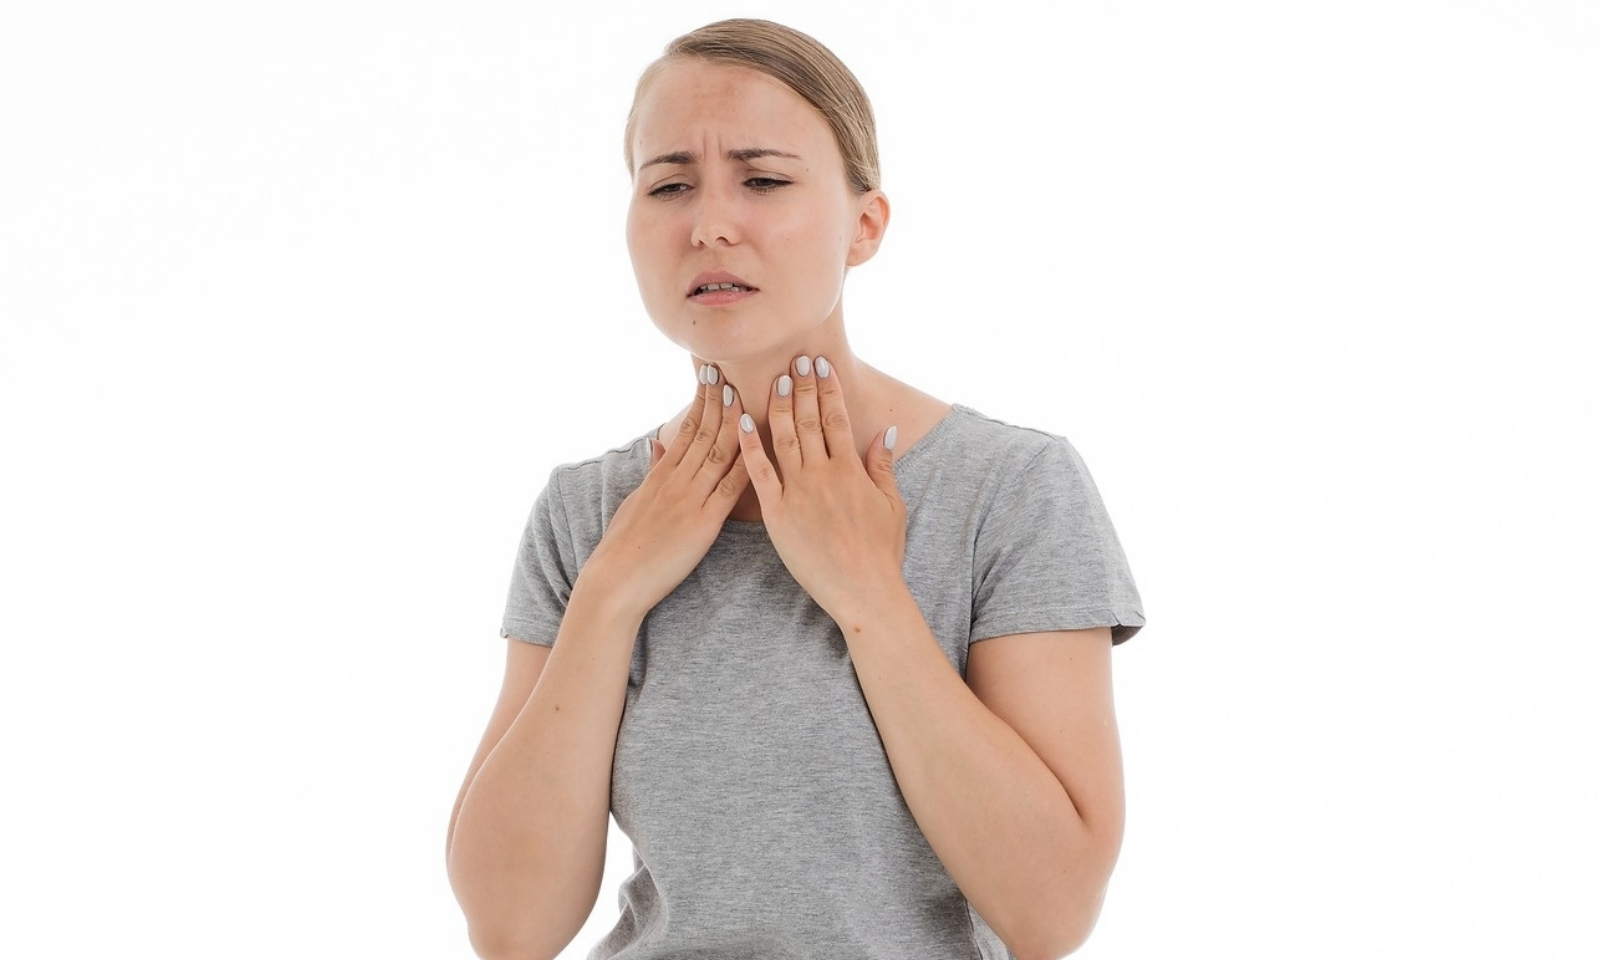 25 Highly Effective Home Remedies for Sore Throat